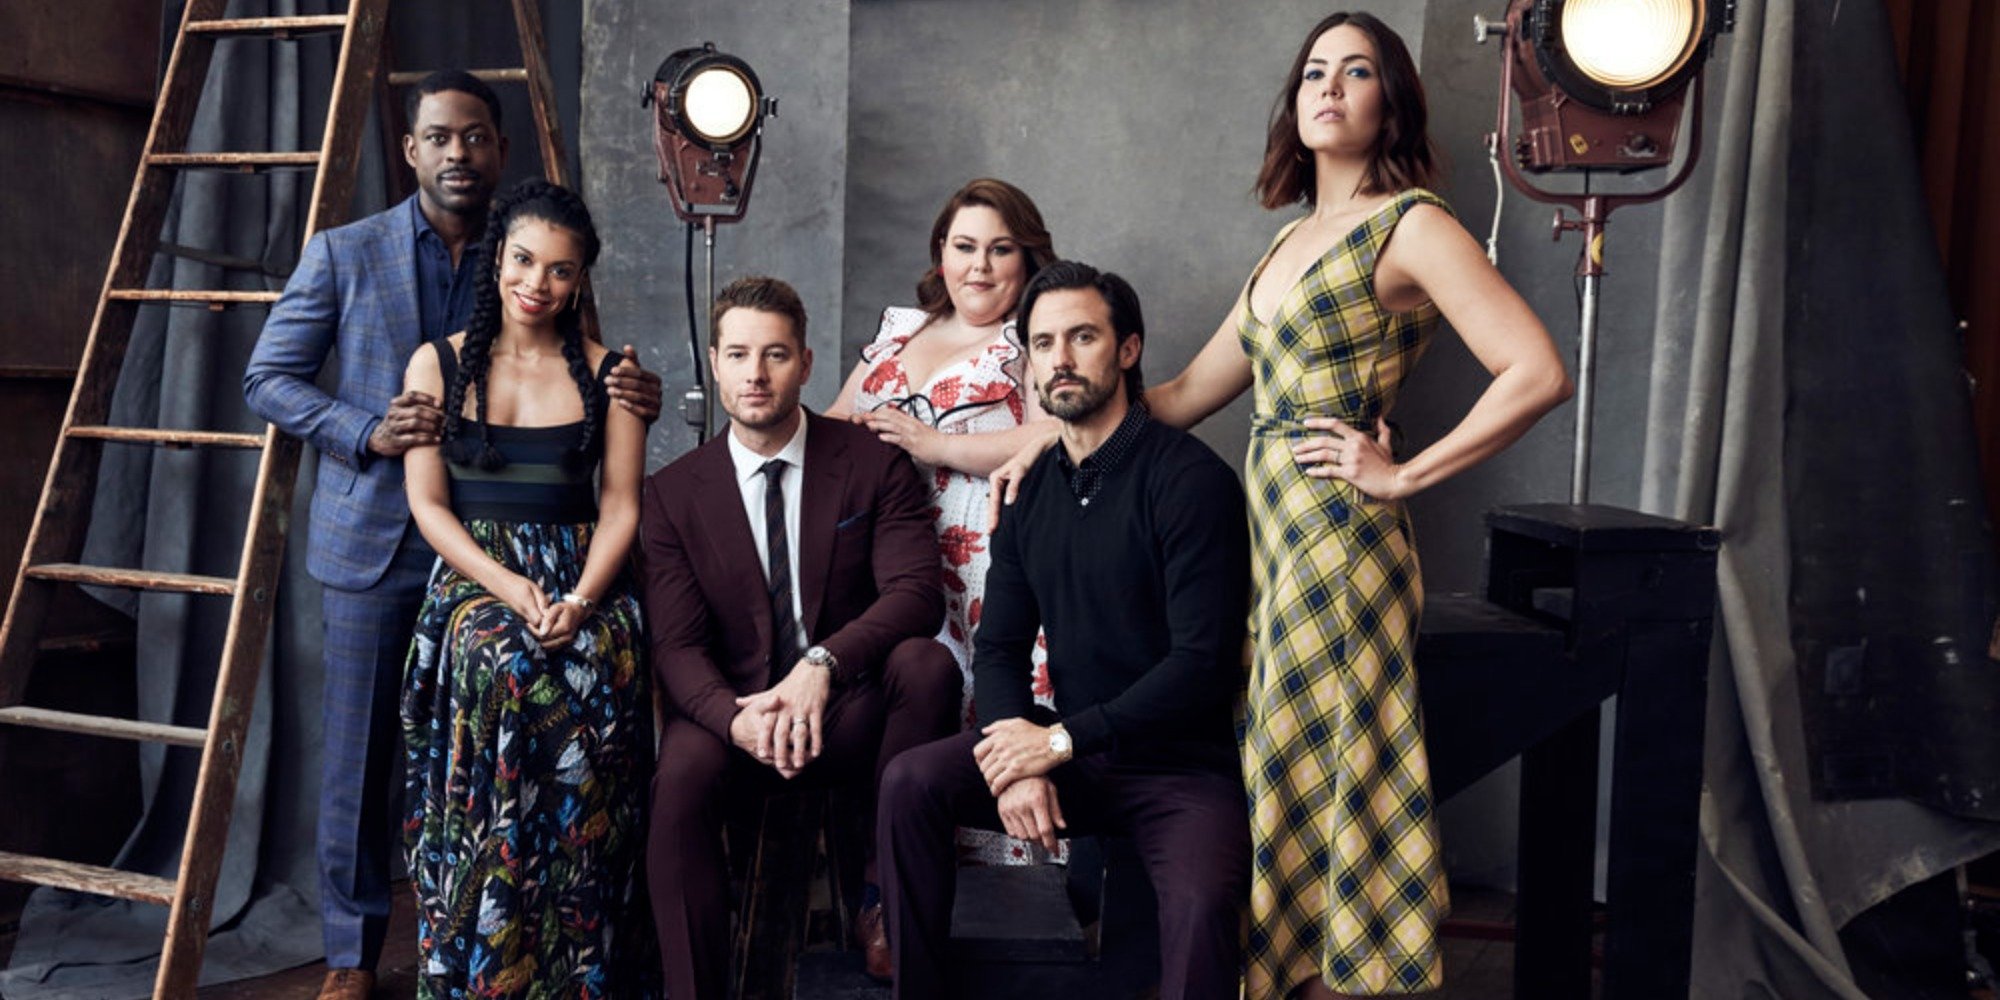 The cast of 'This Is Us' Sterling K Brown, Susan Kelechi Watson, Milo Ventimiglia, Mandy Moore, Justin Hartley, and Chrissy Metz.